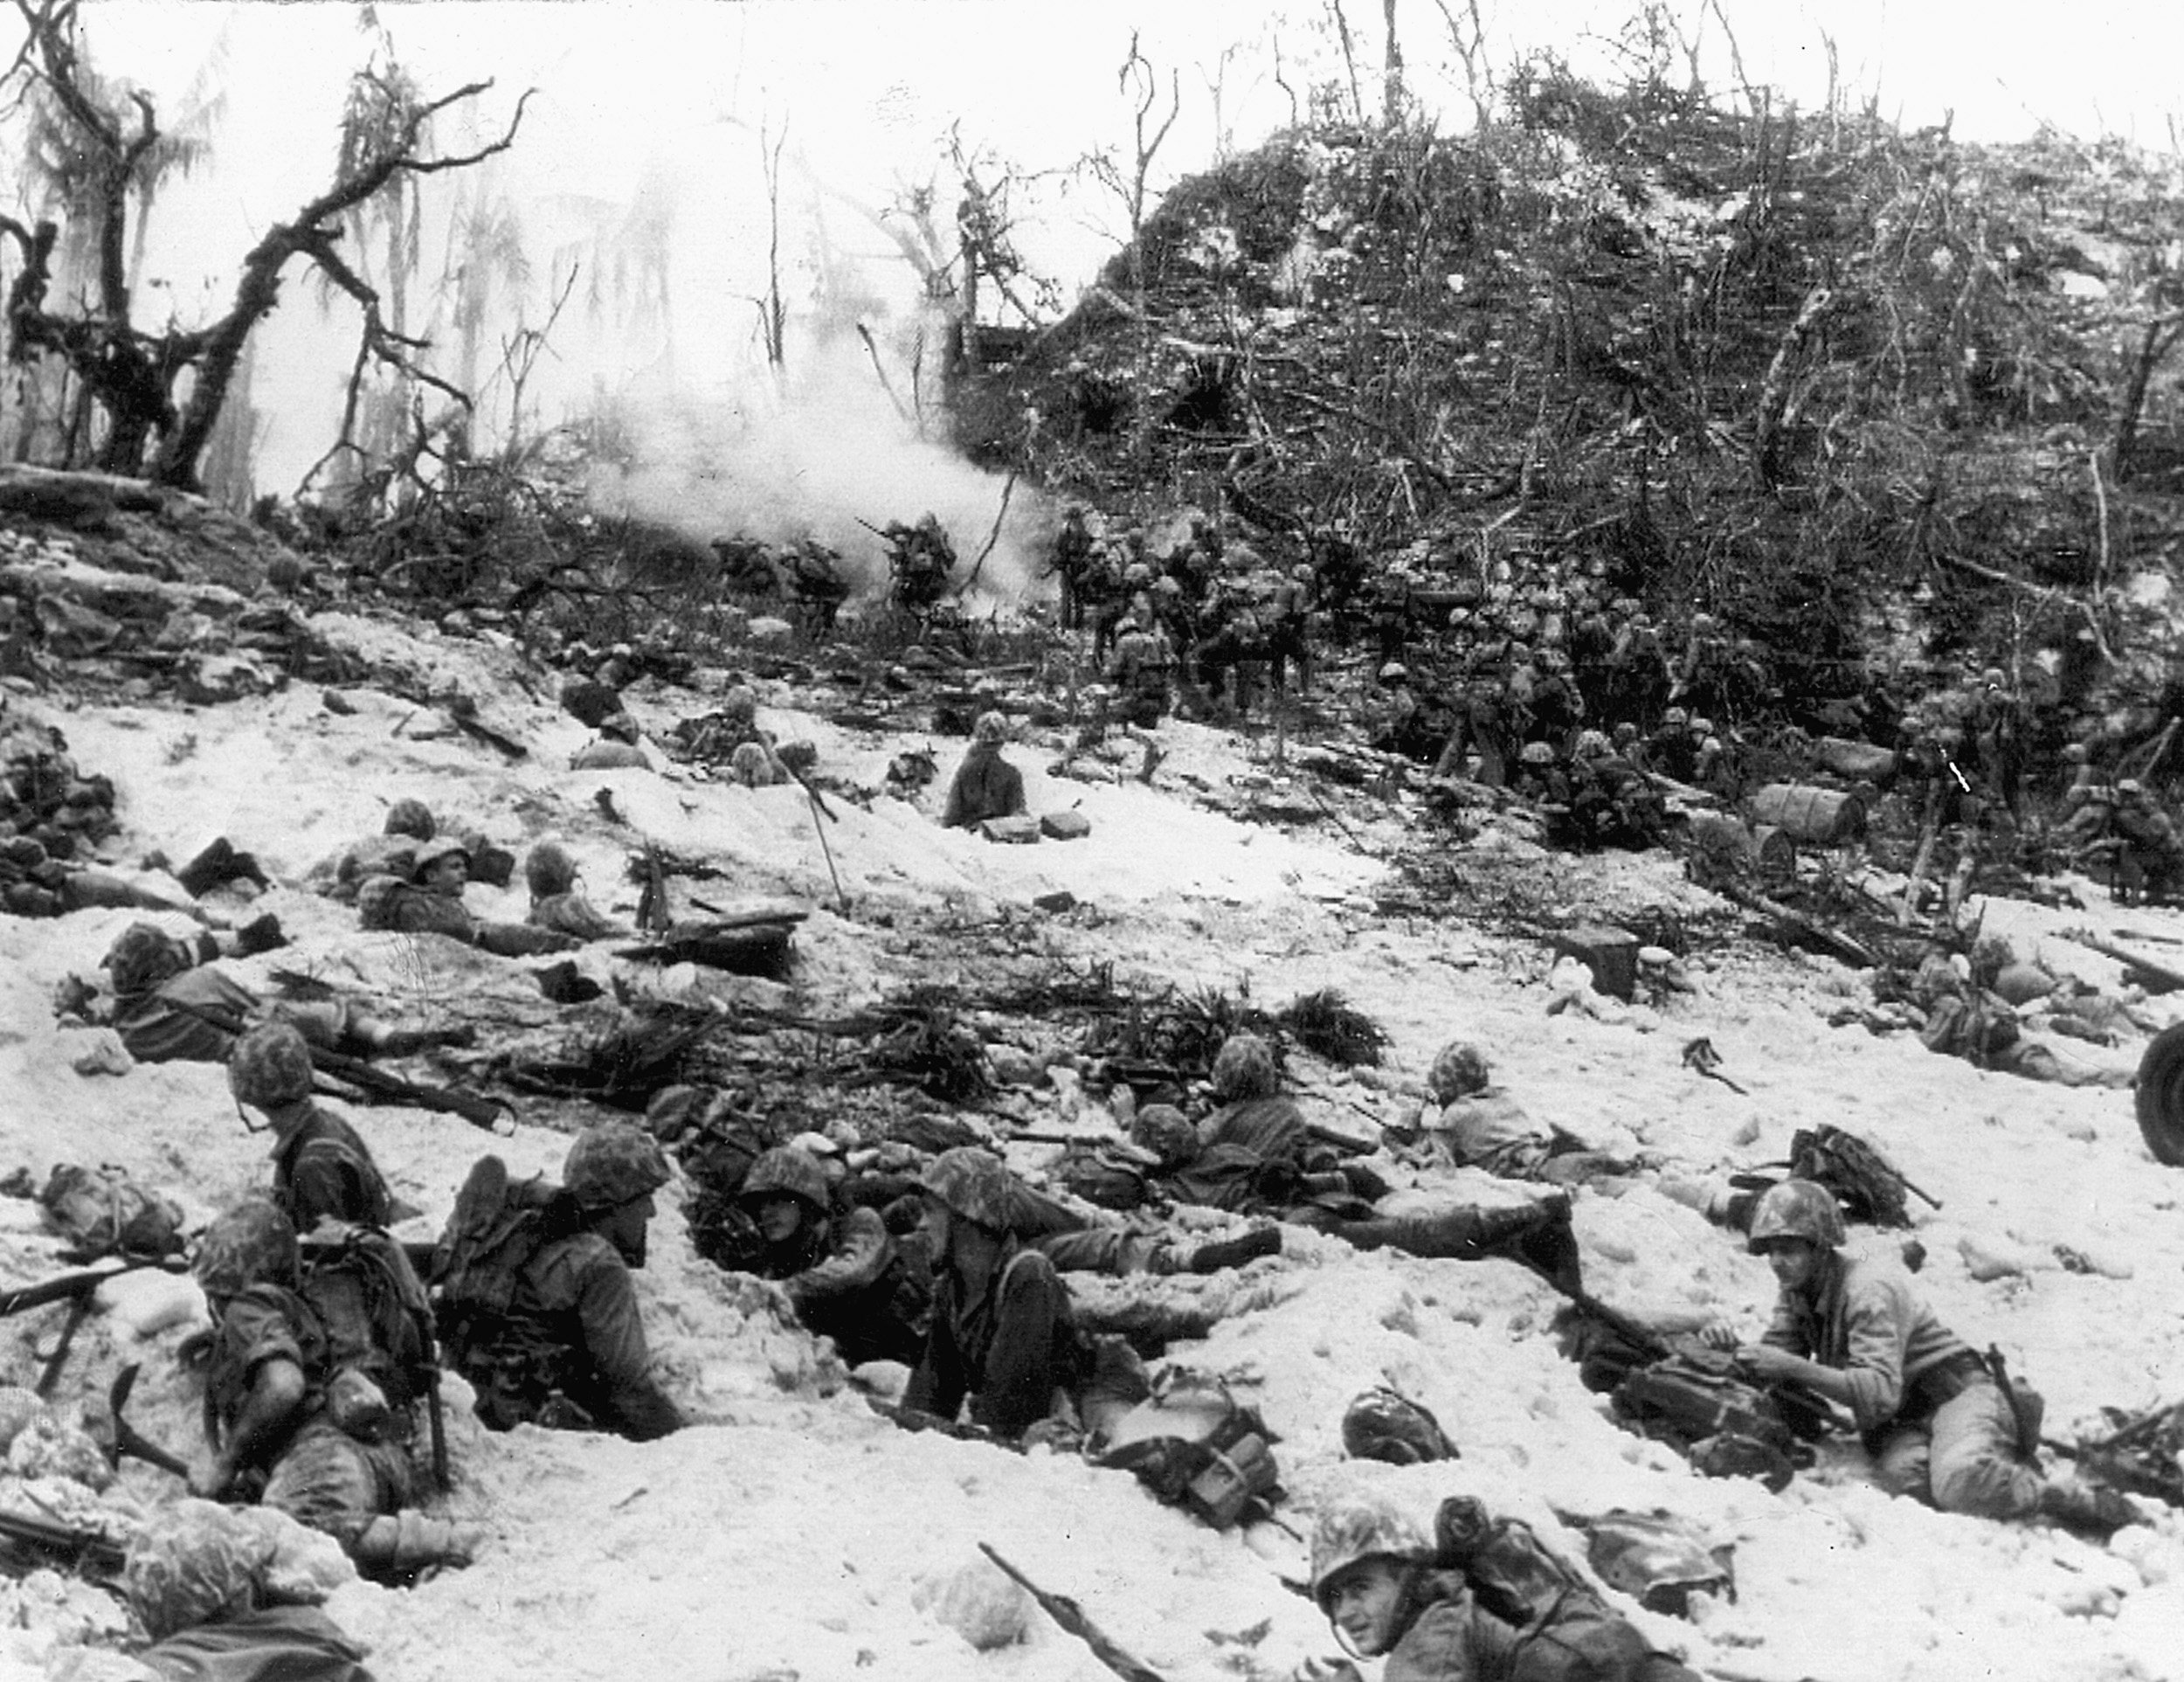 Under heavy fire from an underestimated enemy, Marines of the 1st Division dig in and await orders to move forward.